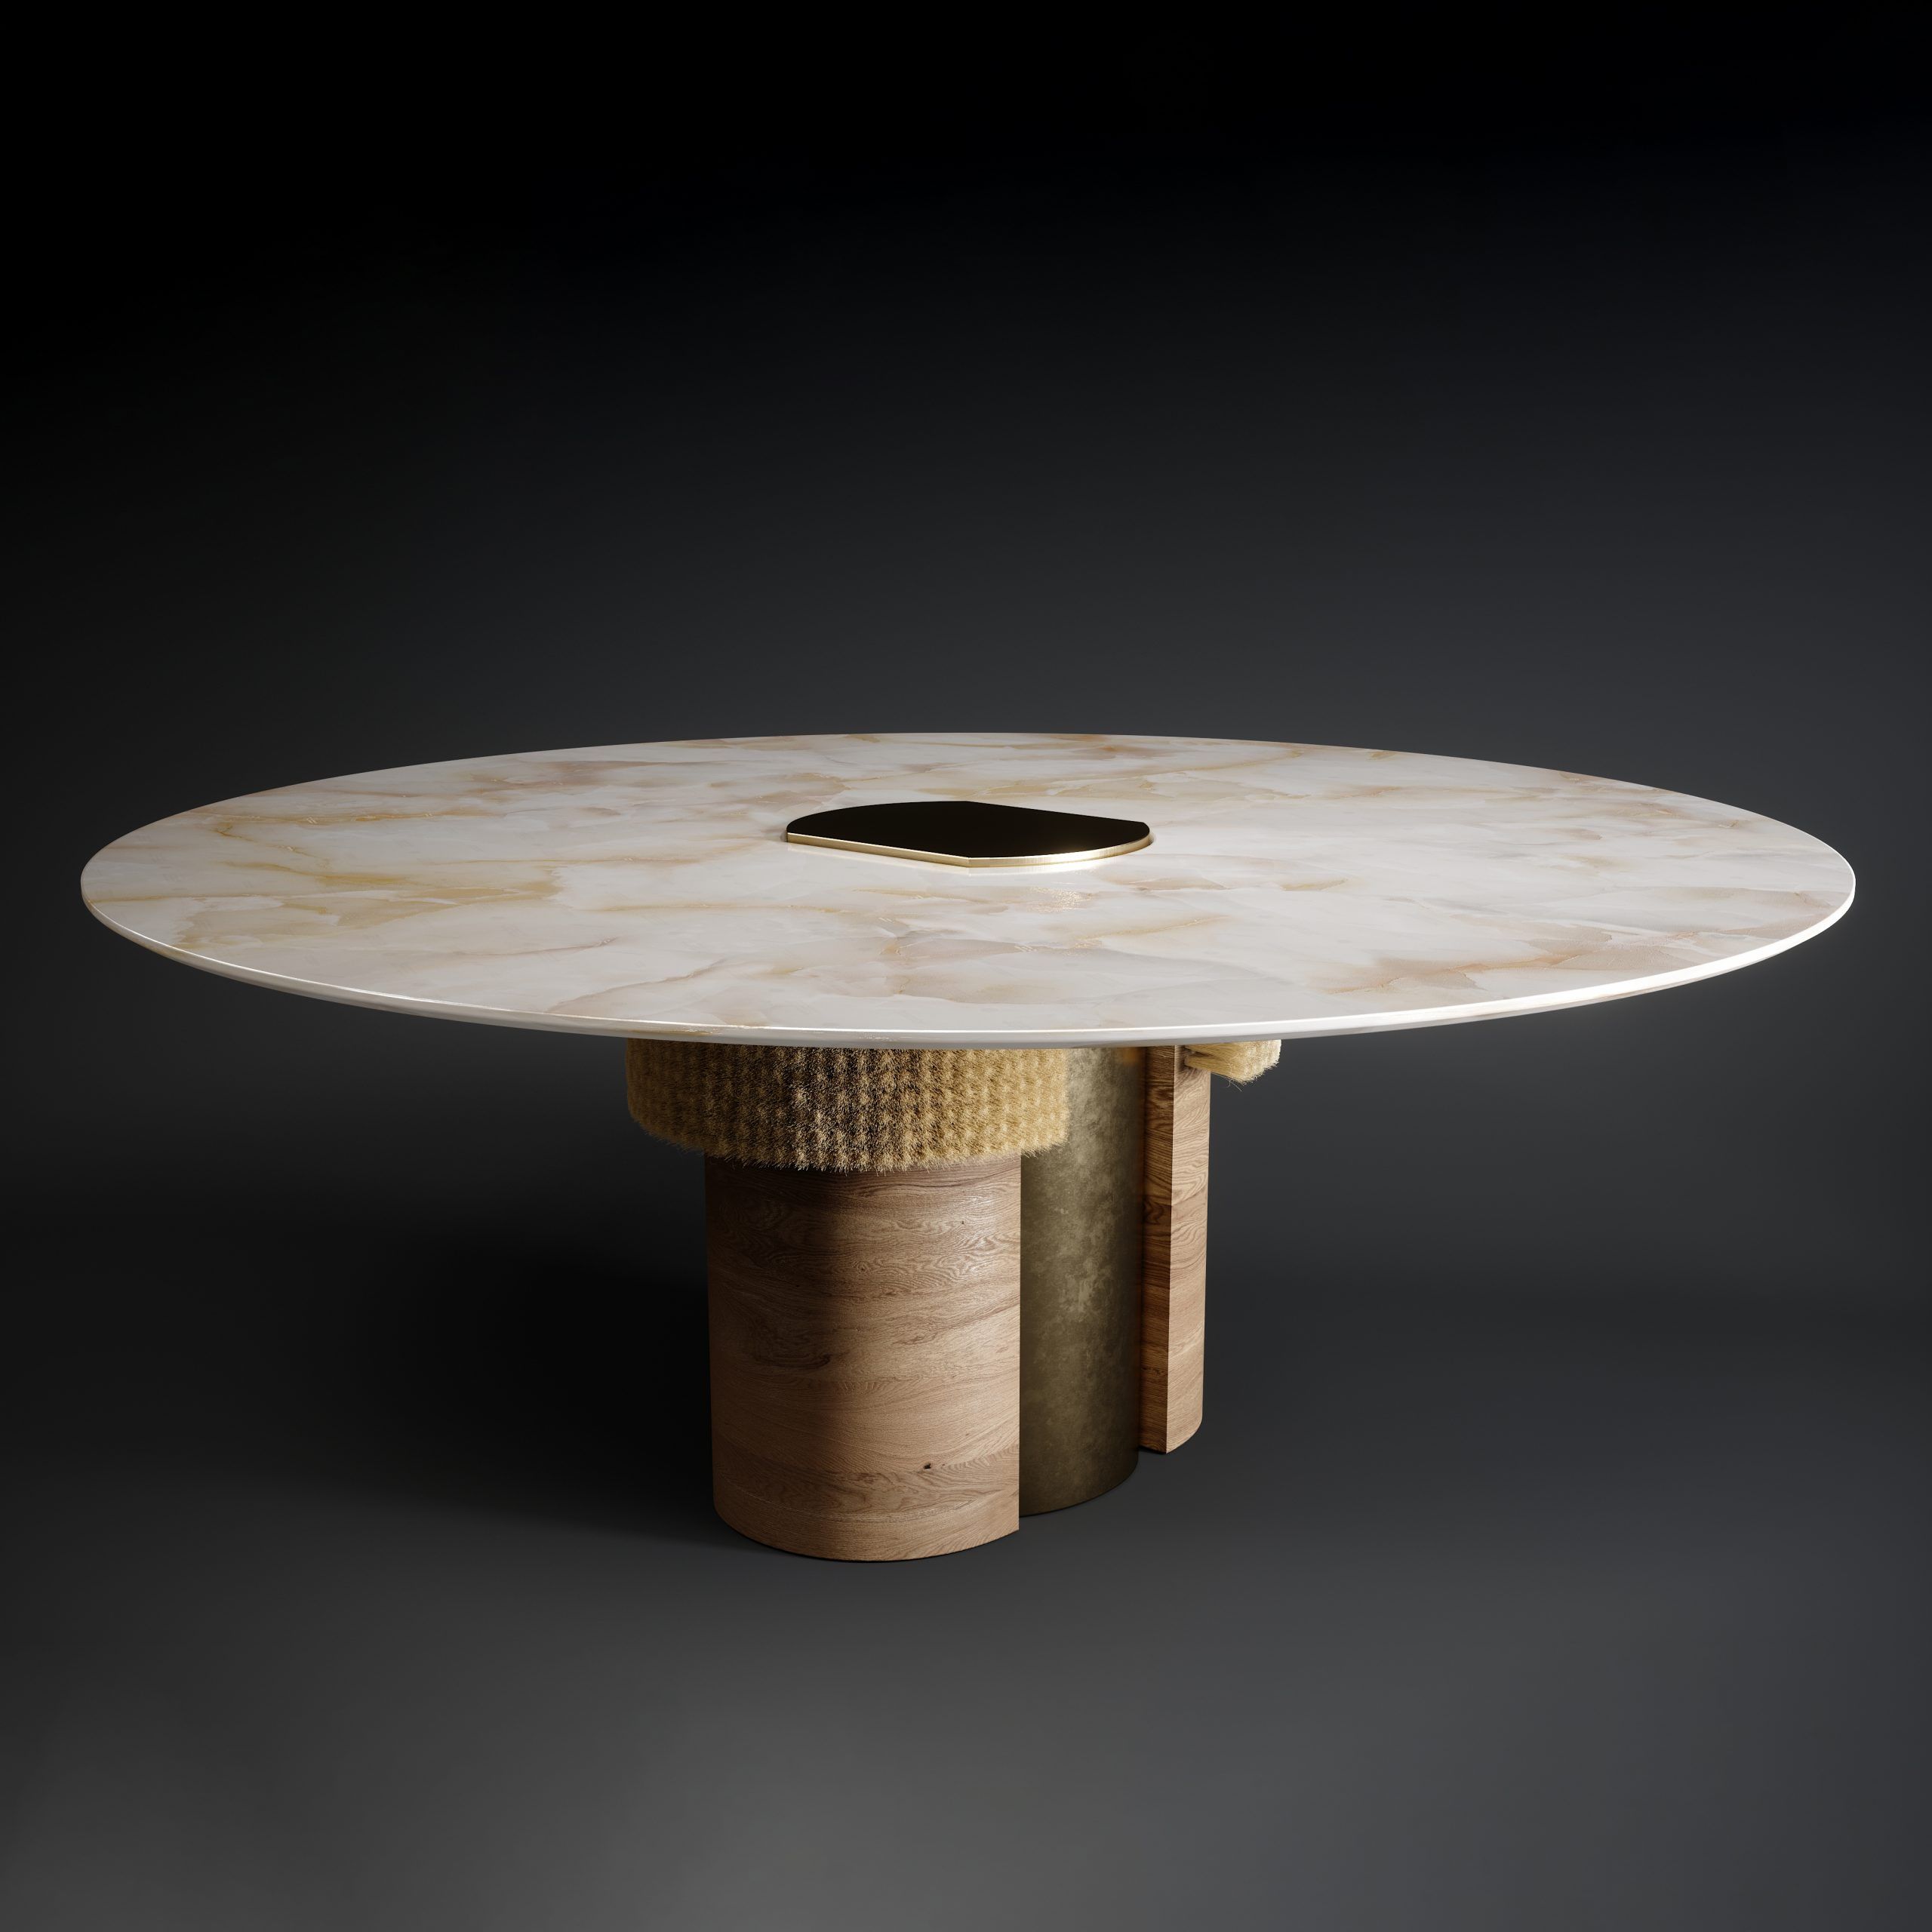 Ad Hoc Roots Table White courtesy ammann//gallery